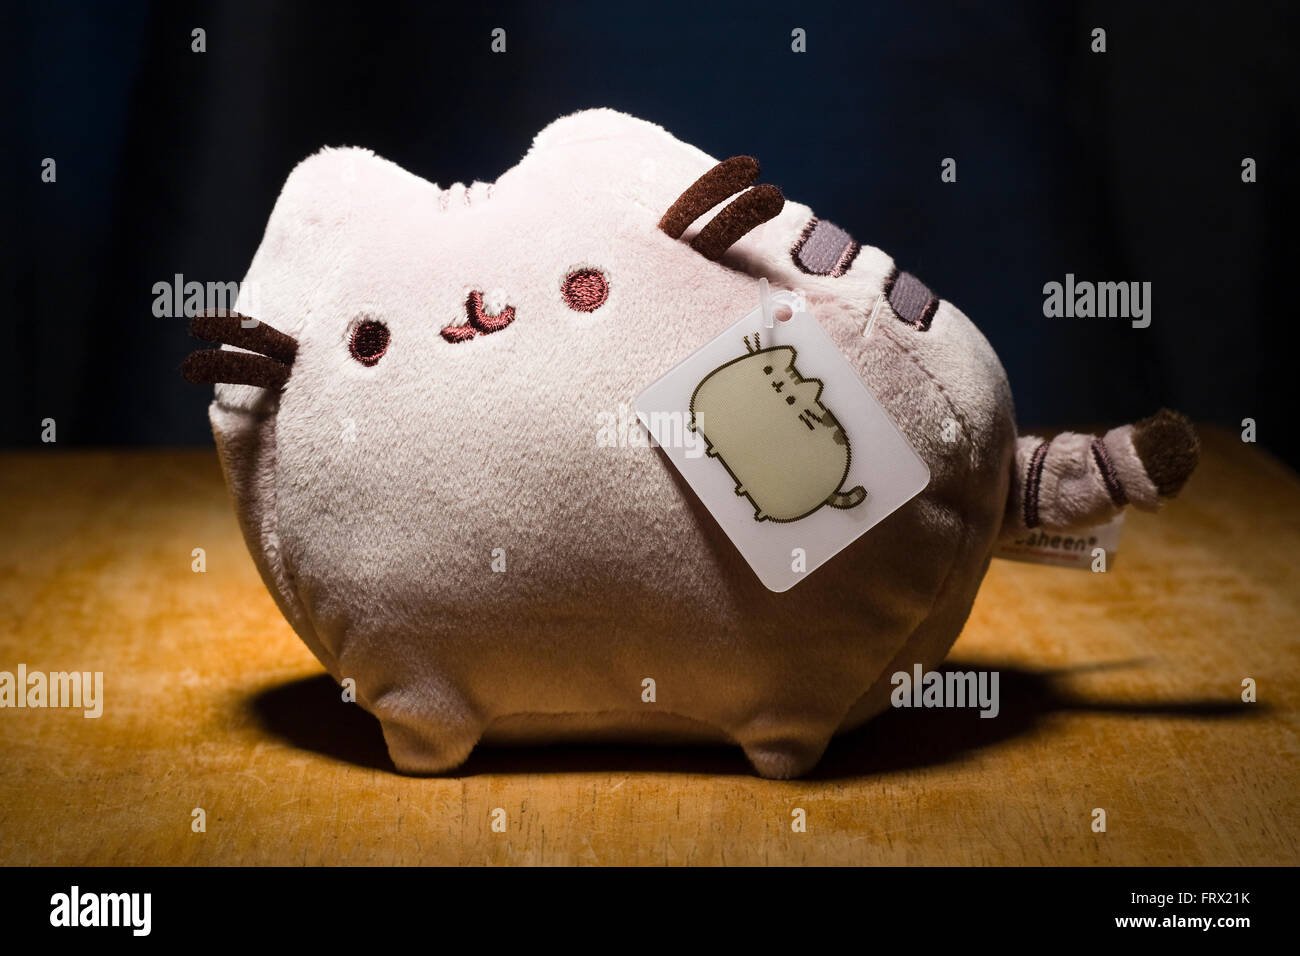 Pusheen Cat also spelled Pusheencat or Pusheenthecat Plush Toy Stuffed Animal lit from above on wooden table with hologram tag Stock Photo